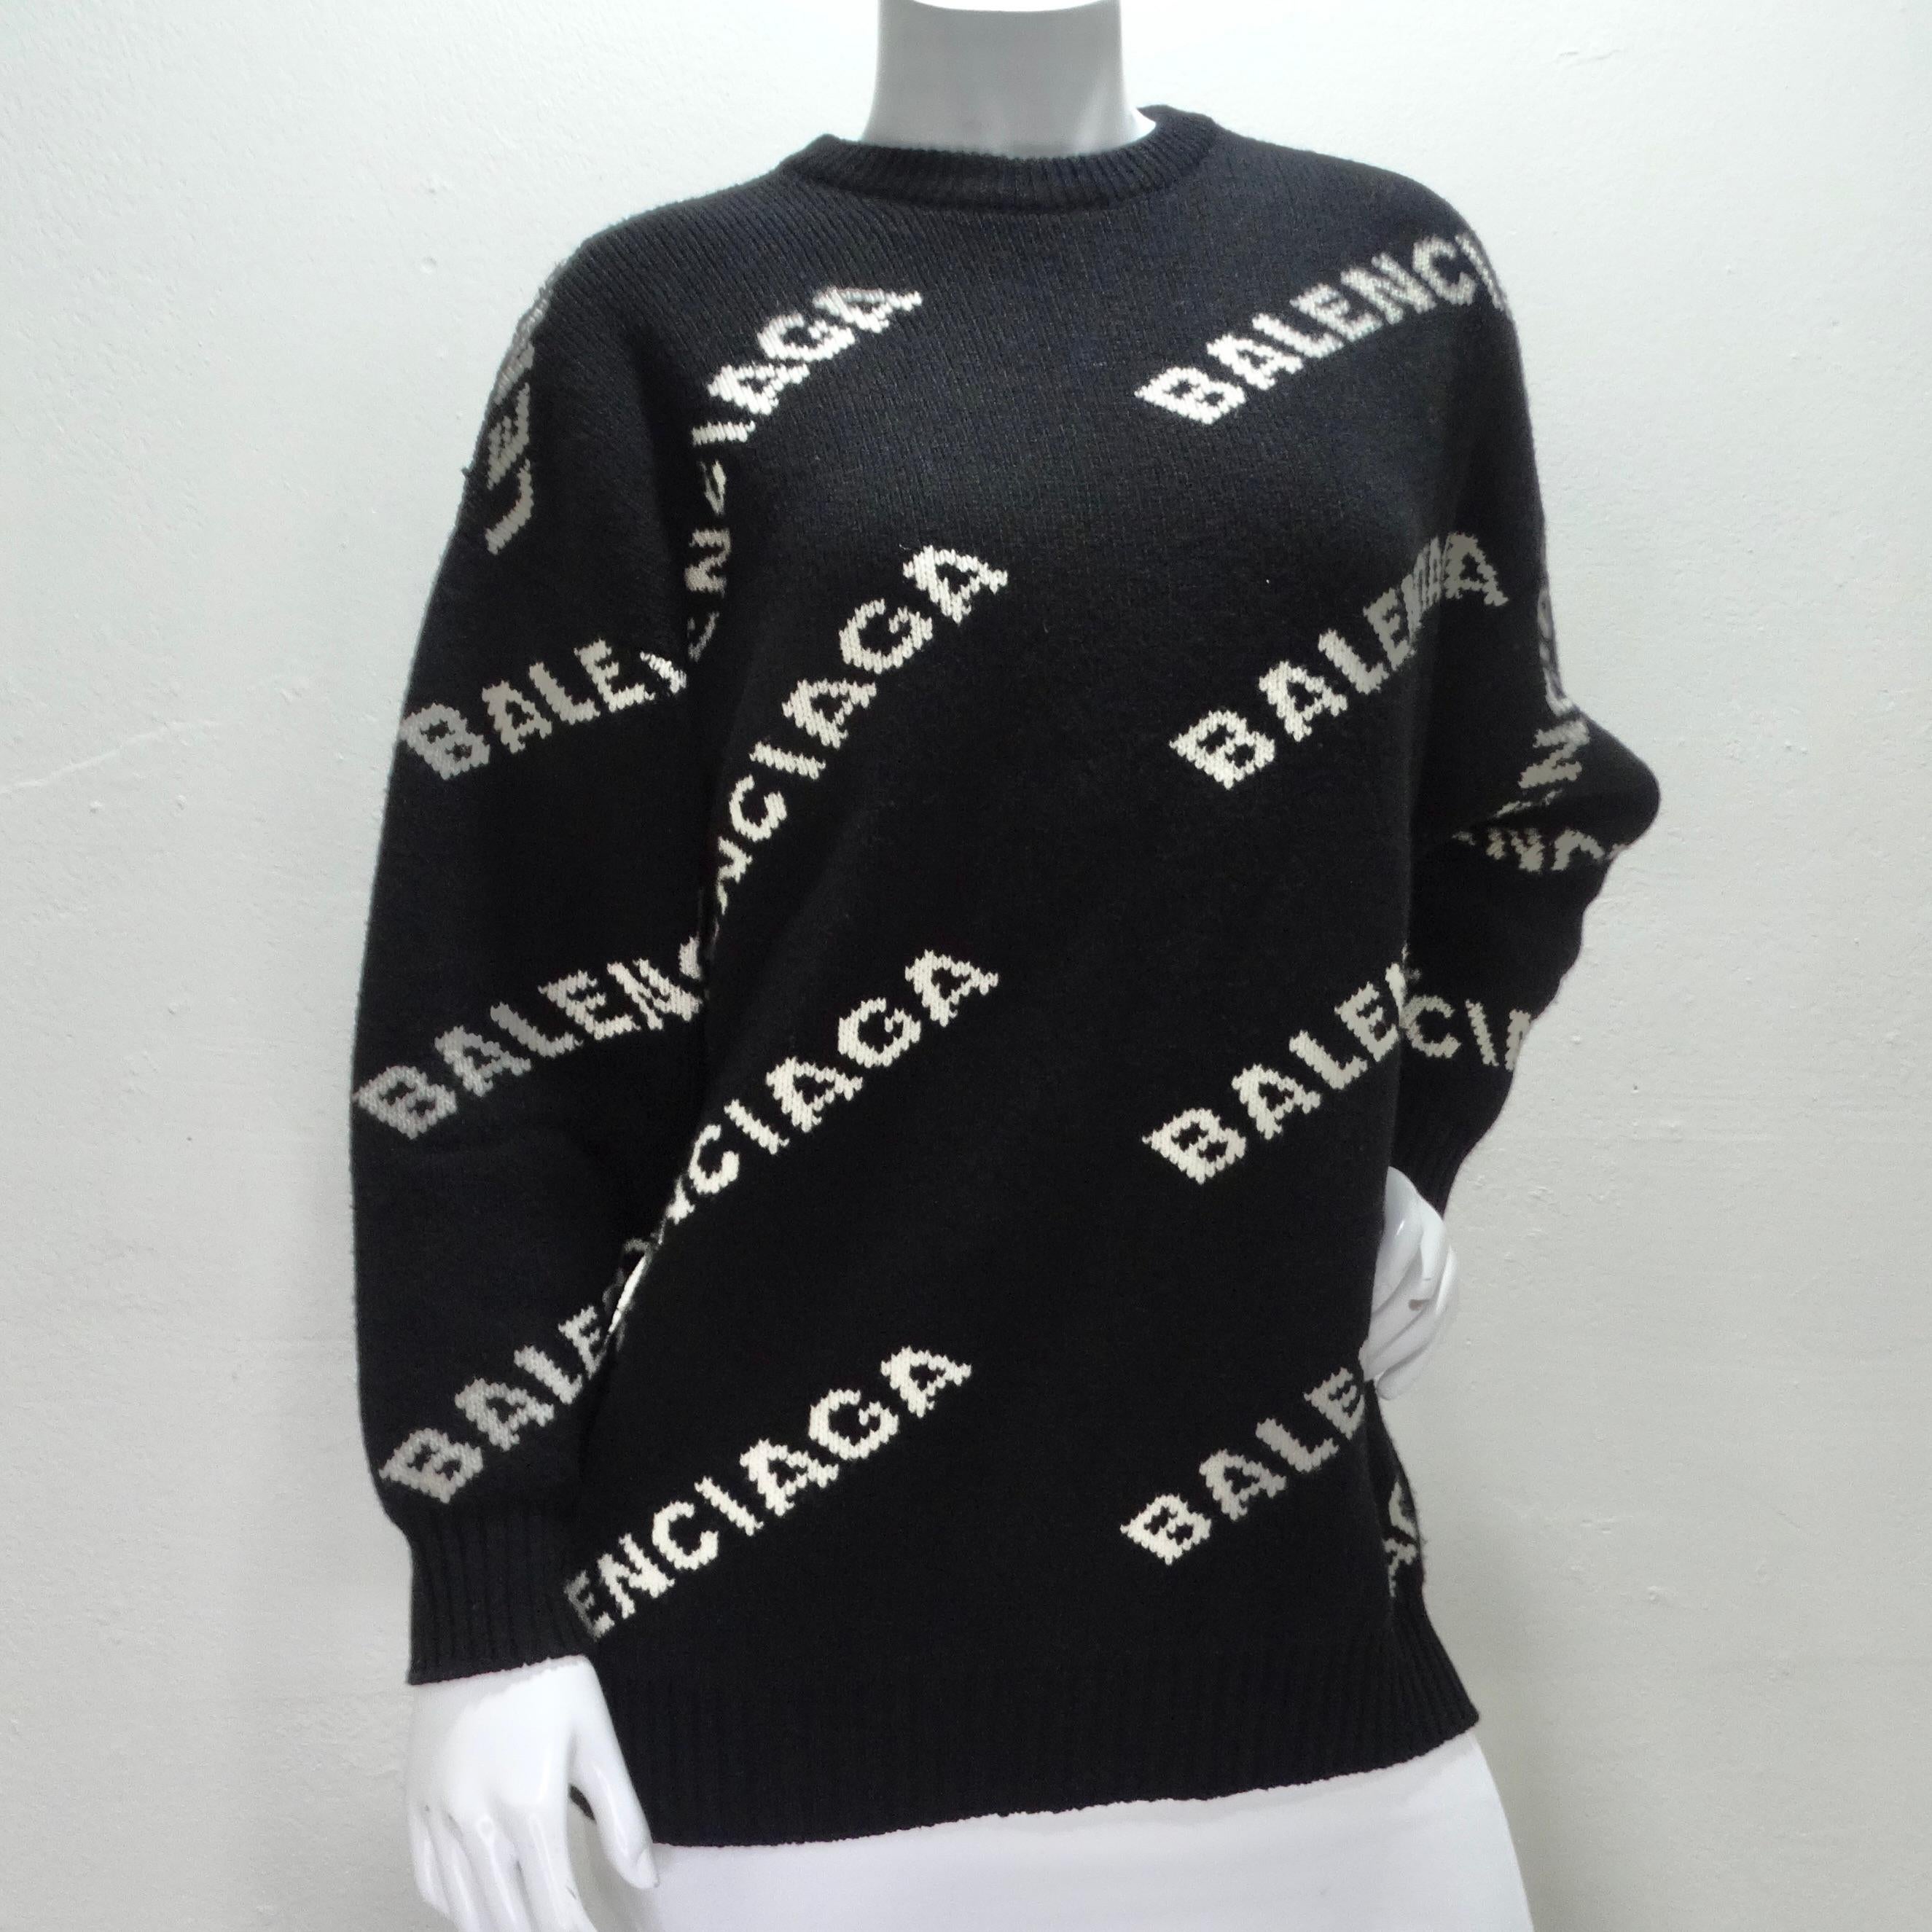 Introducing the Balenciaga Allover Logo Wool Sweater - a classic yet contemporary addition to your wardrobe that effortlessly combines comfort and style. This sweater embodies the essence of Balenciaga's timeless luxury. Crafted from premium black